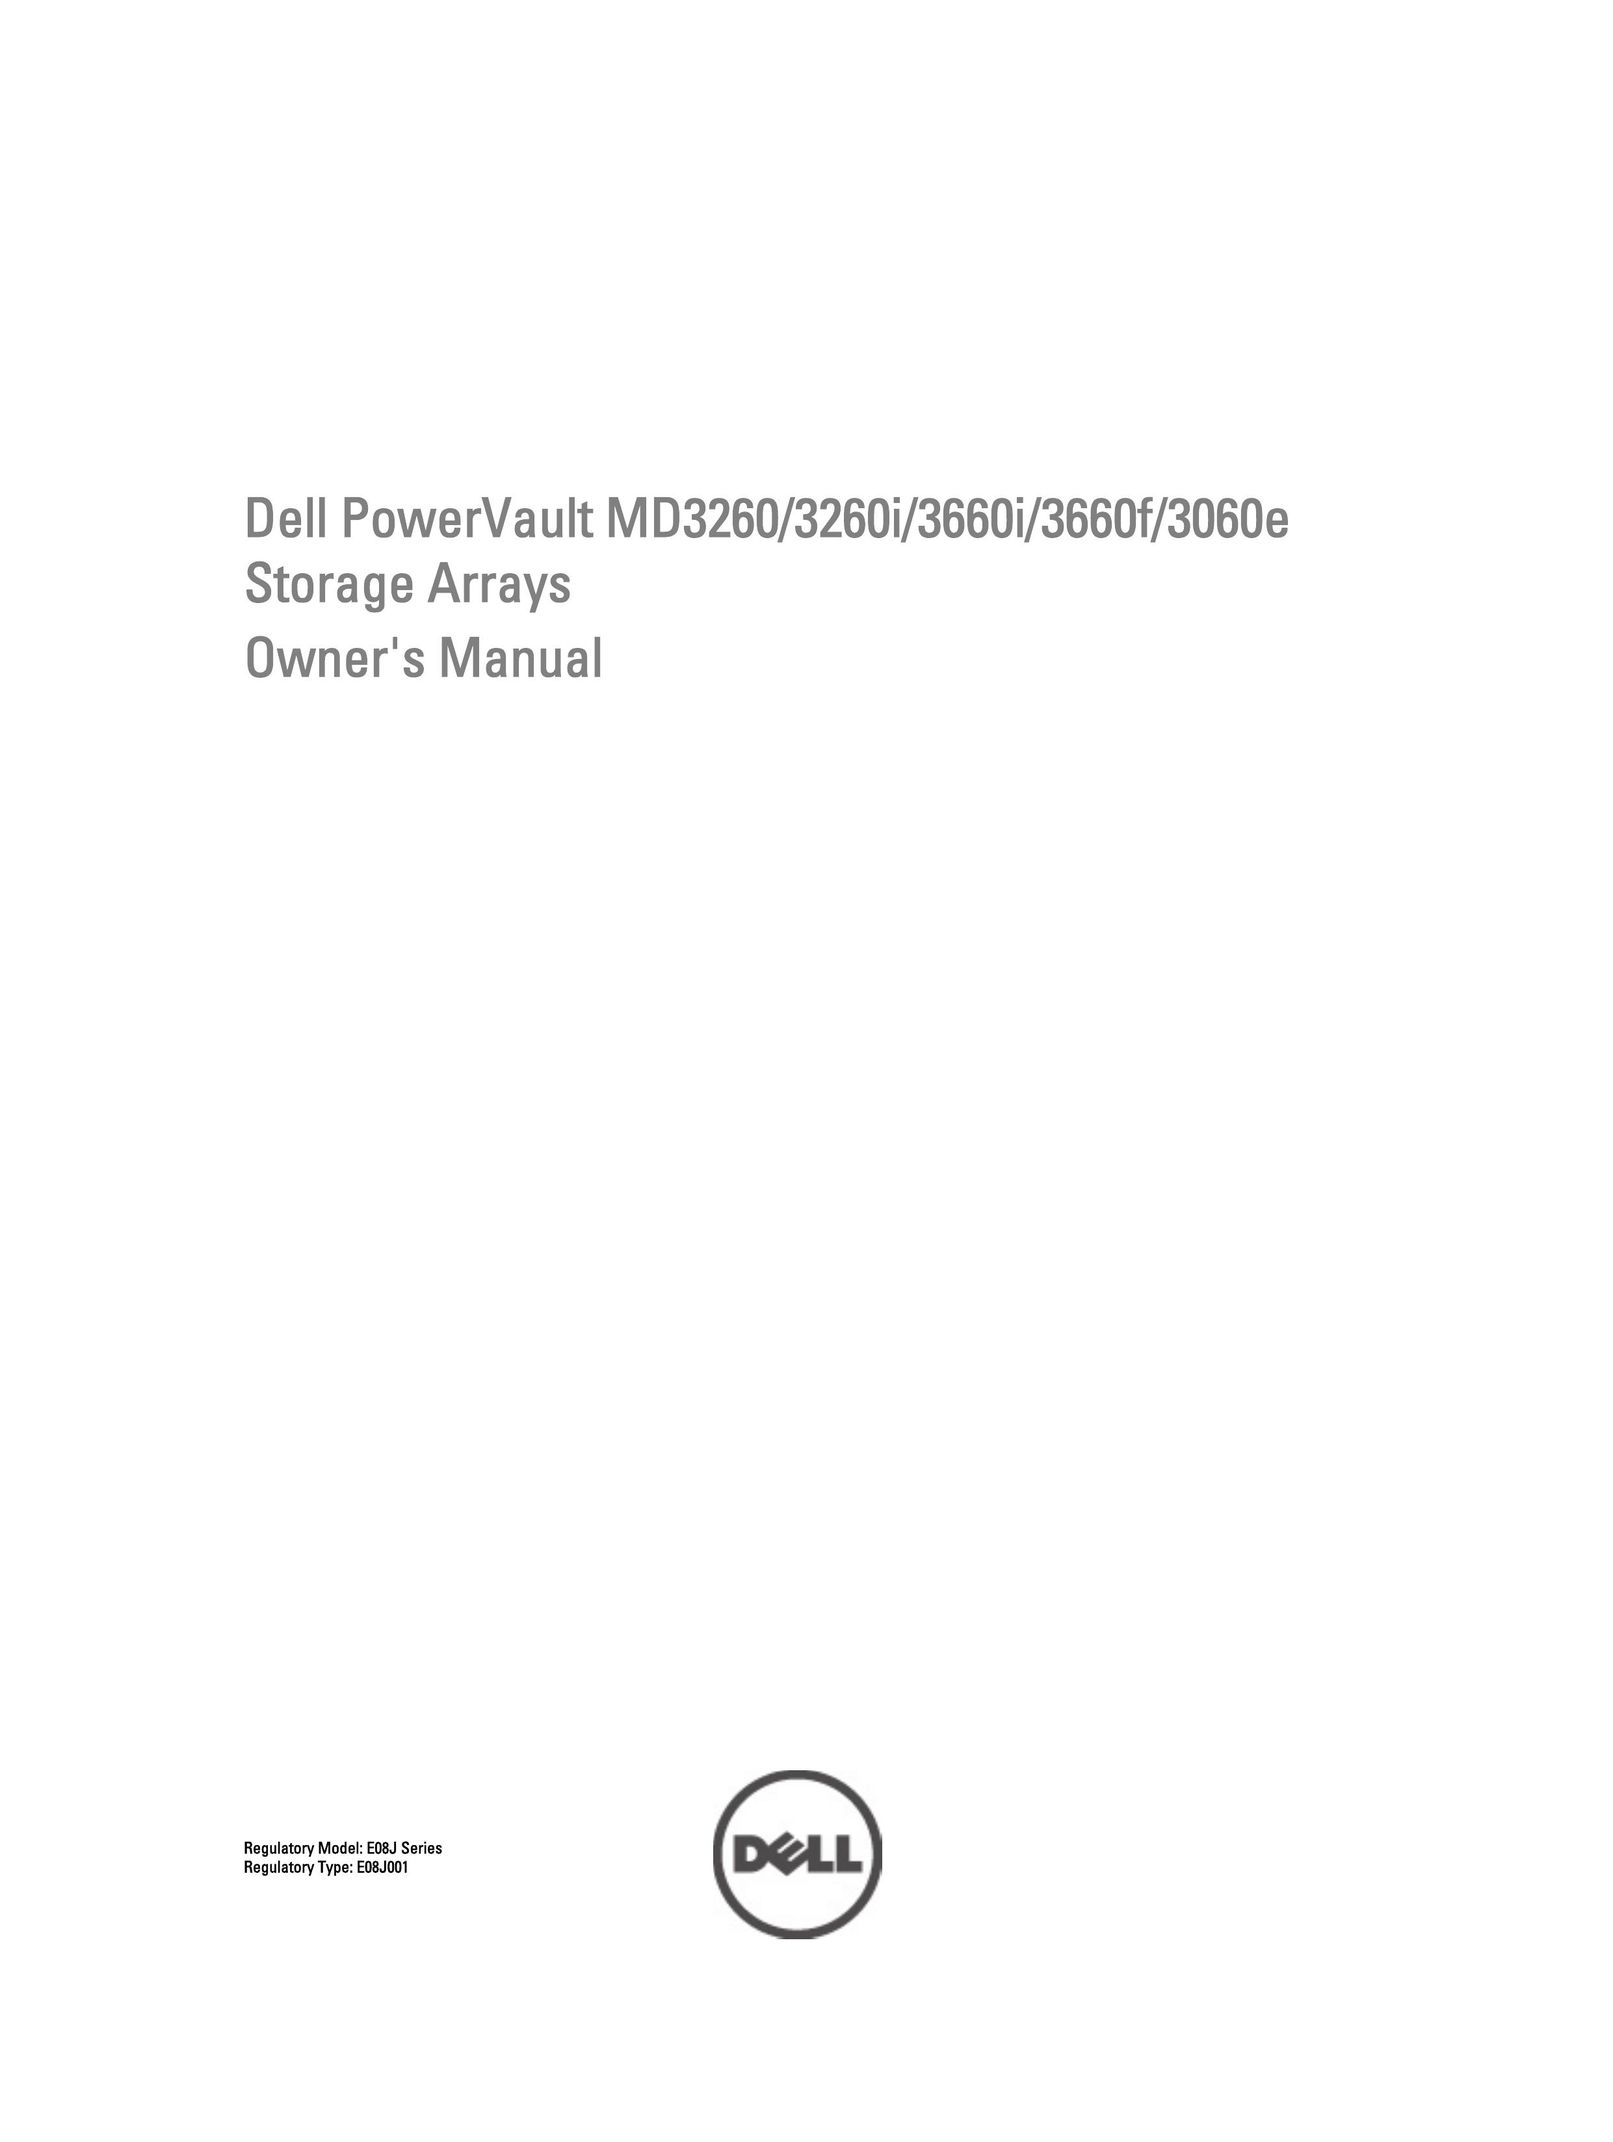 Dell MD3260i Tool Storage User Manual